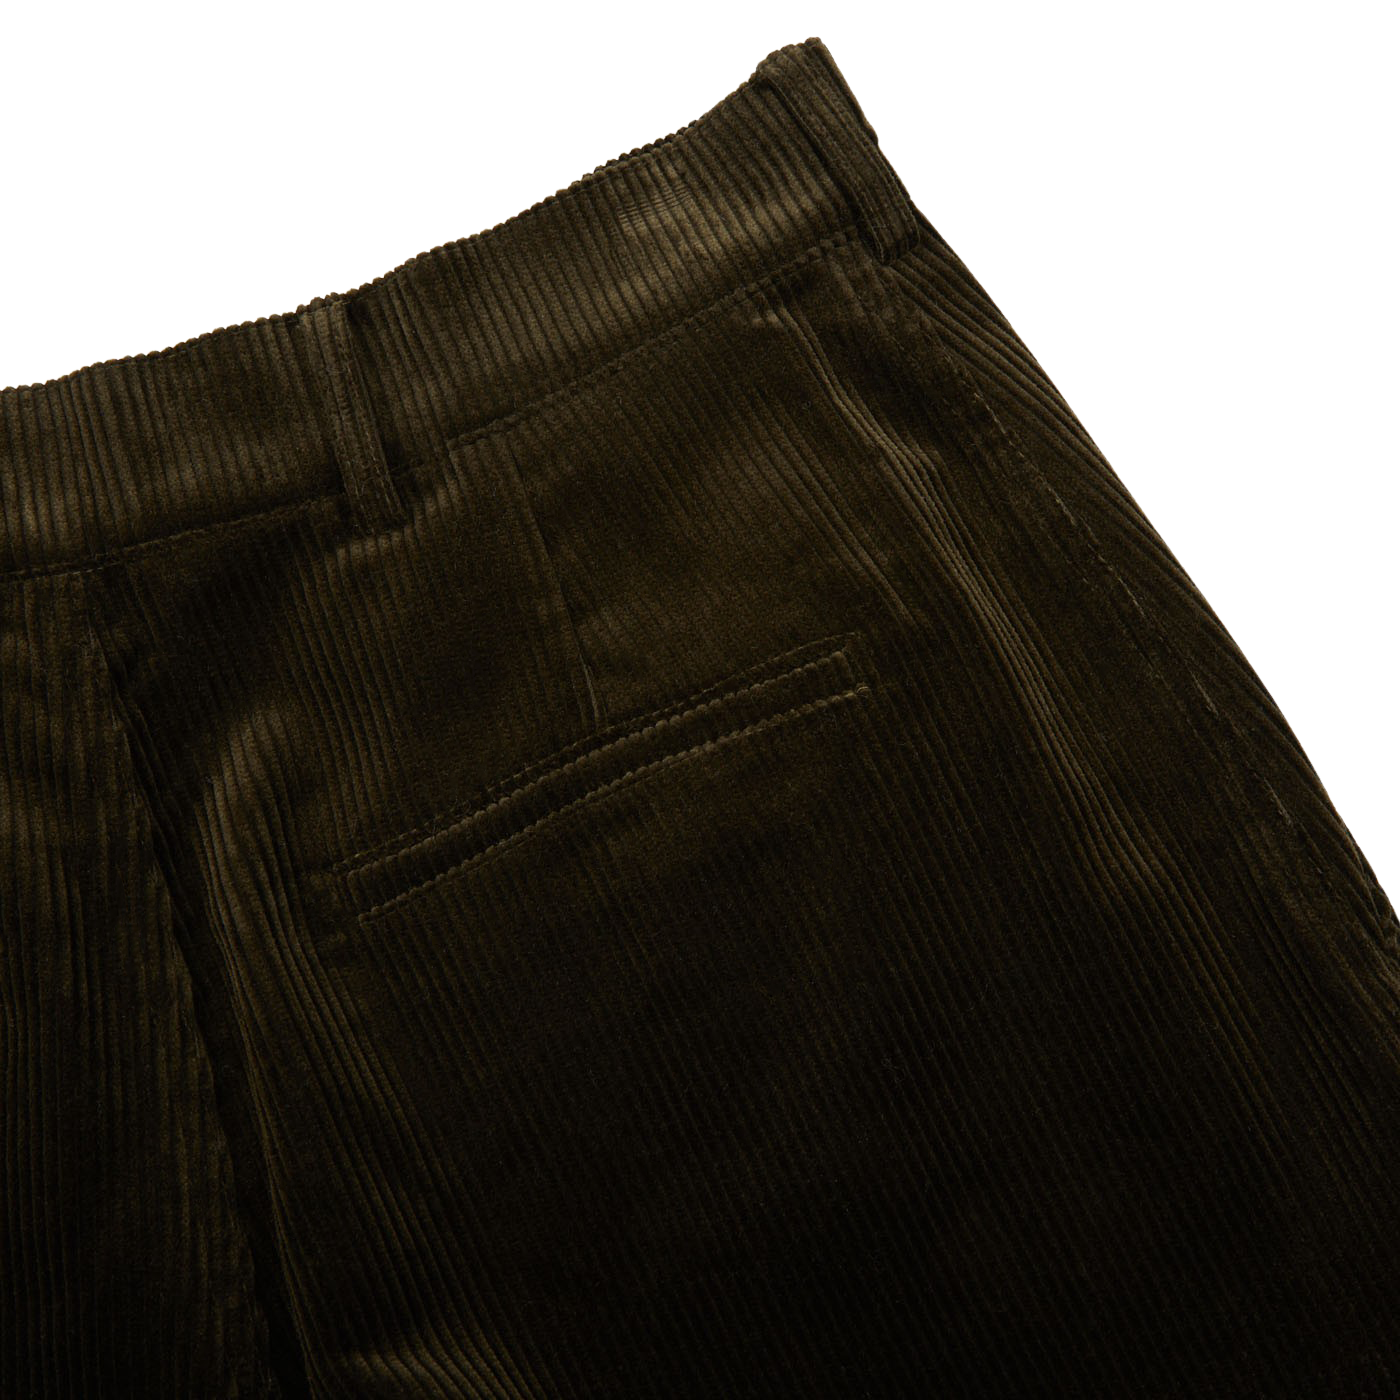 A close up of the Dark Olive Cotton Corduroy Balloon Trousers made by De Bonne Facture.